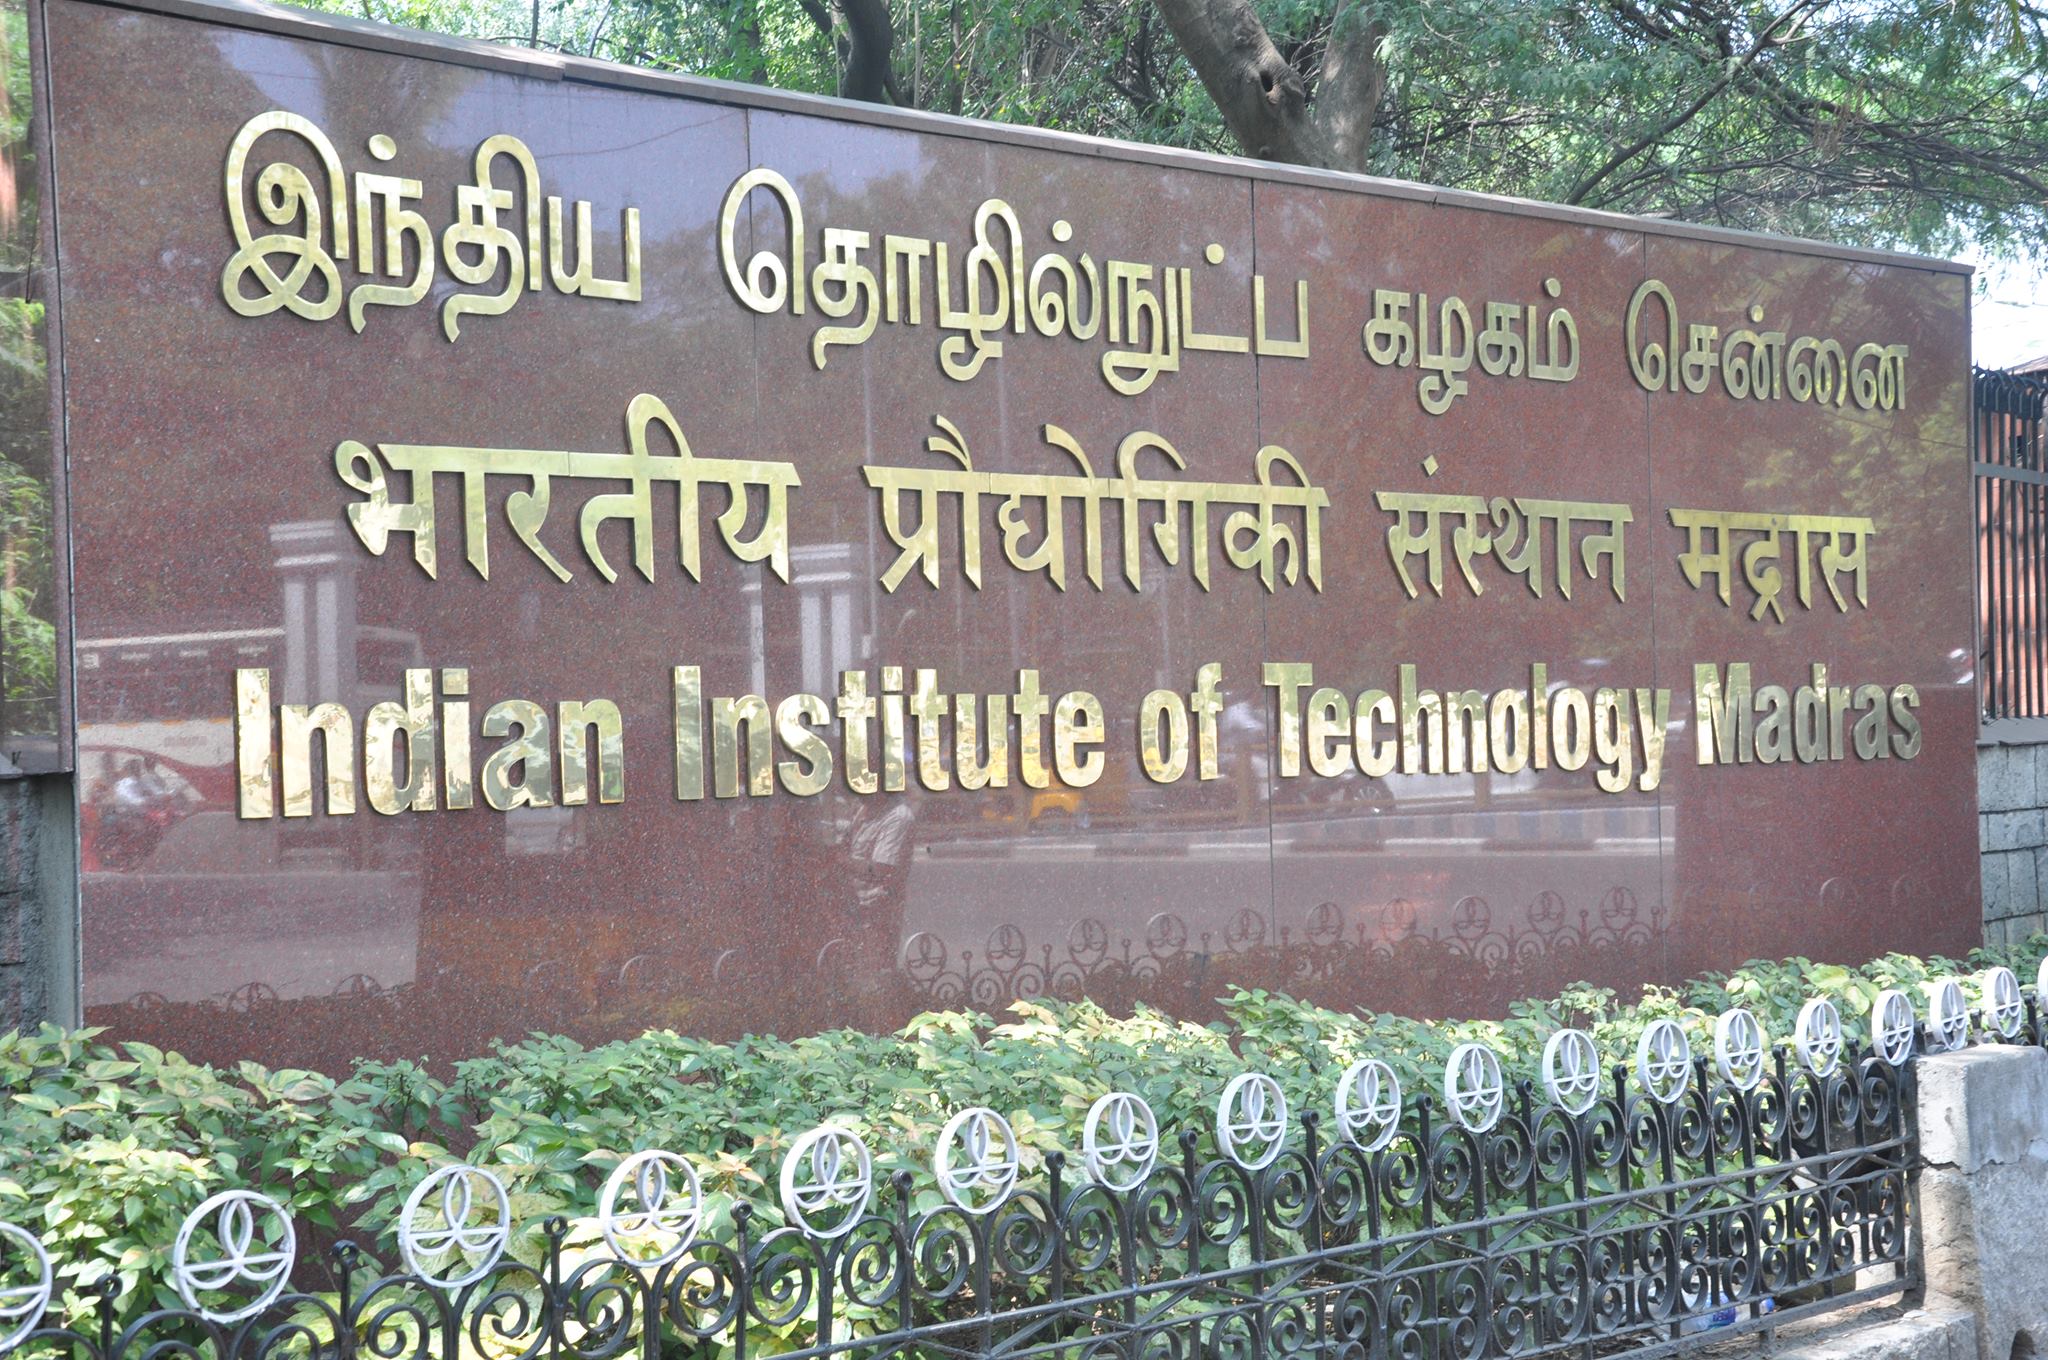 IIT Madras Records Strong Pre-Placement Offers for Students this year too, despite COVID-19